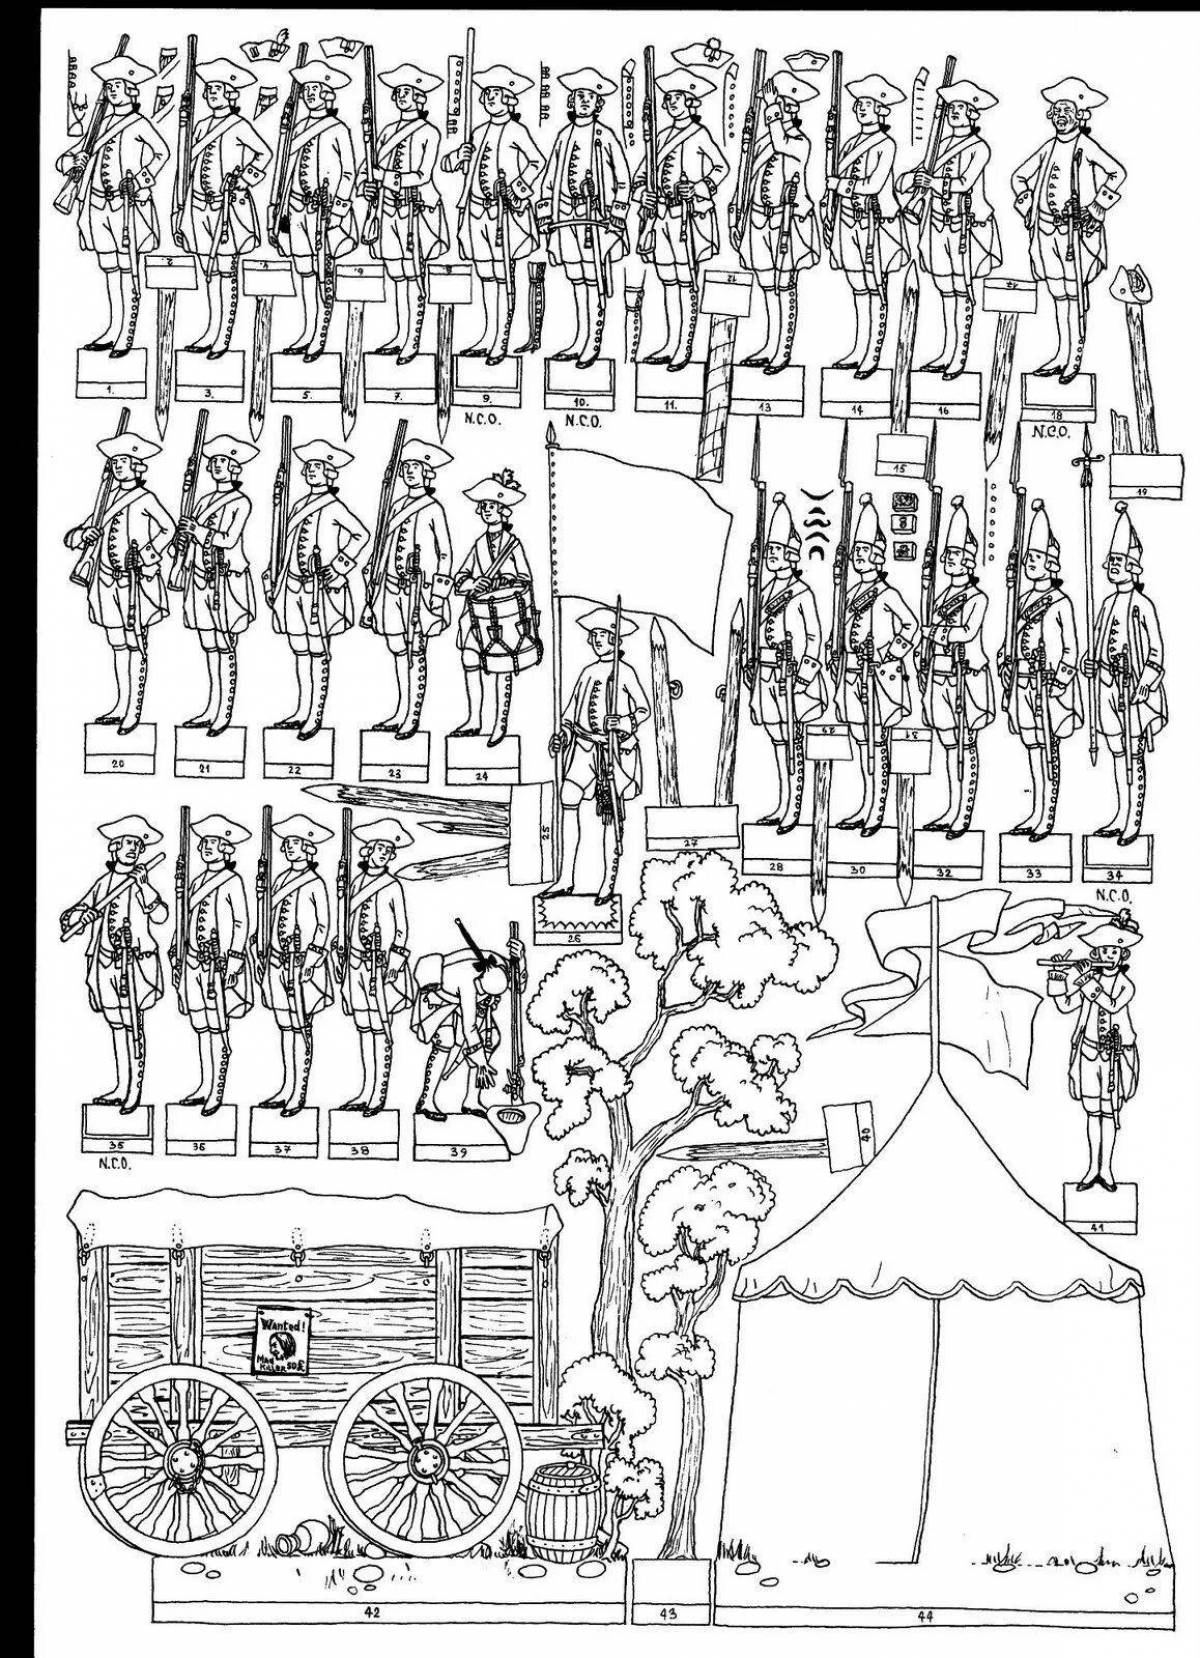 Impressive coloring pages of tin soldiers